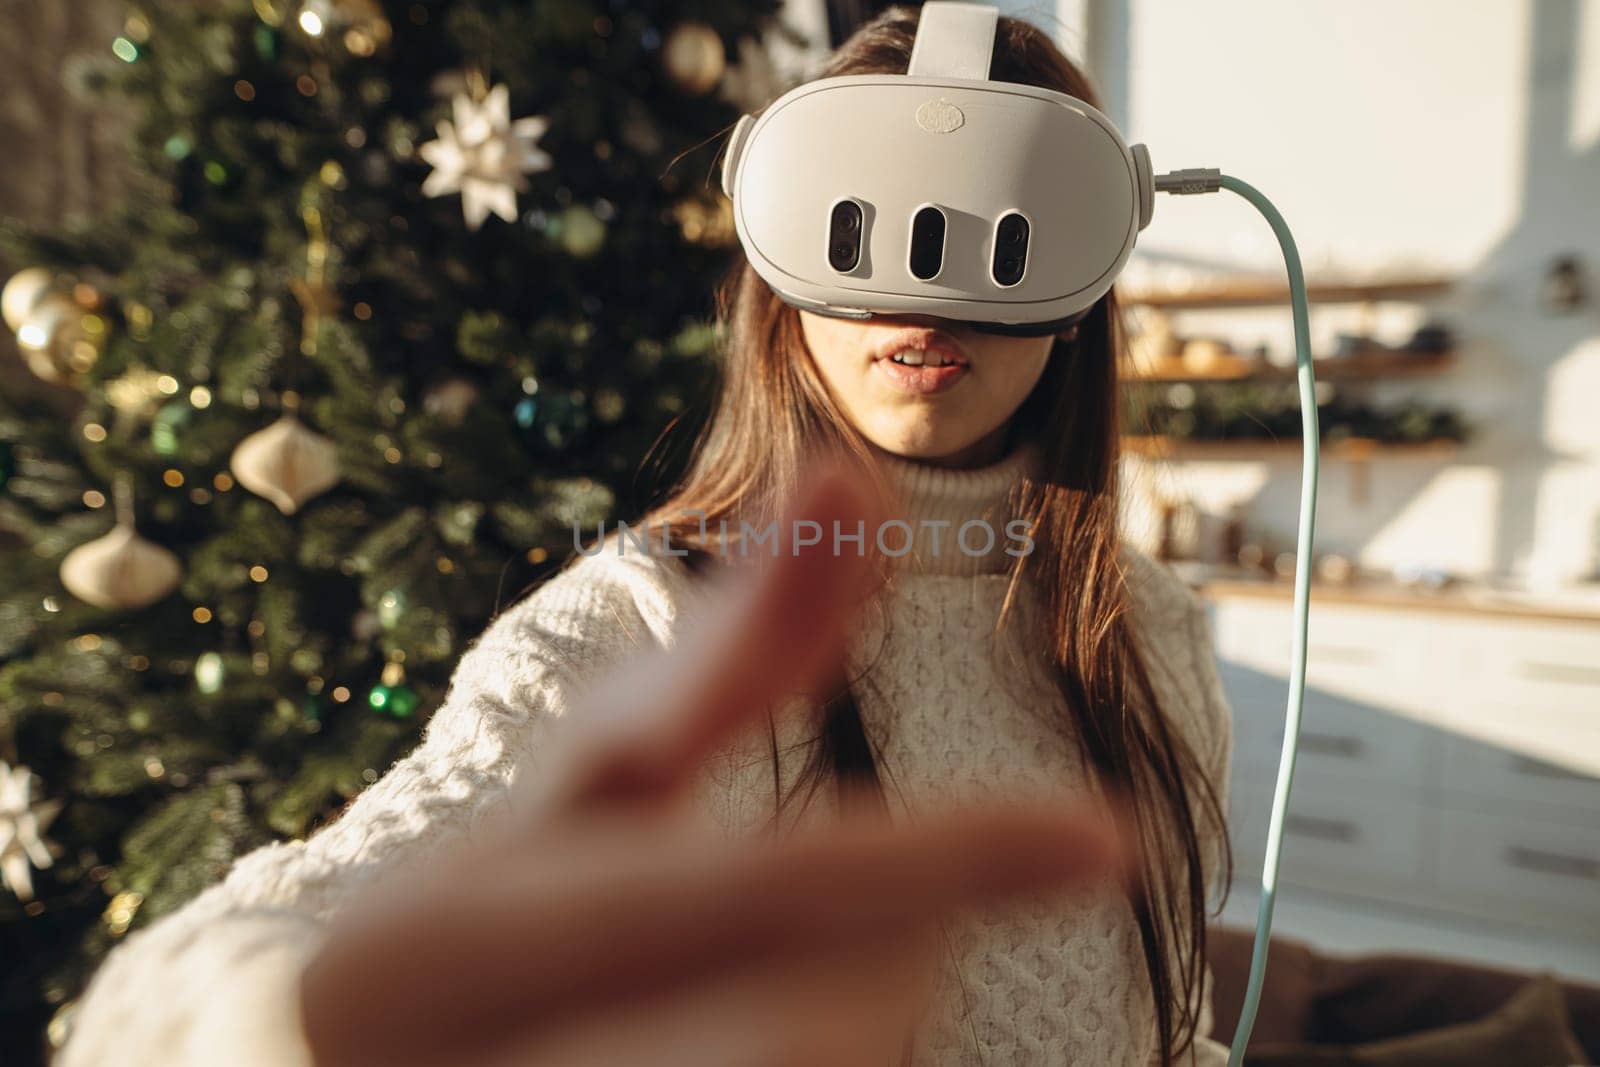 A portrait showcasing a beautiful girl with a VR headset against the festive backdrop of a Christmas tree. High quality photo